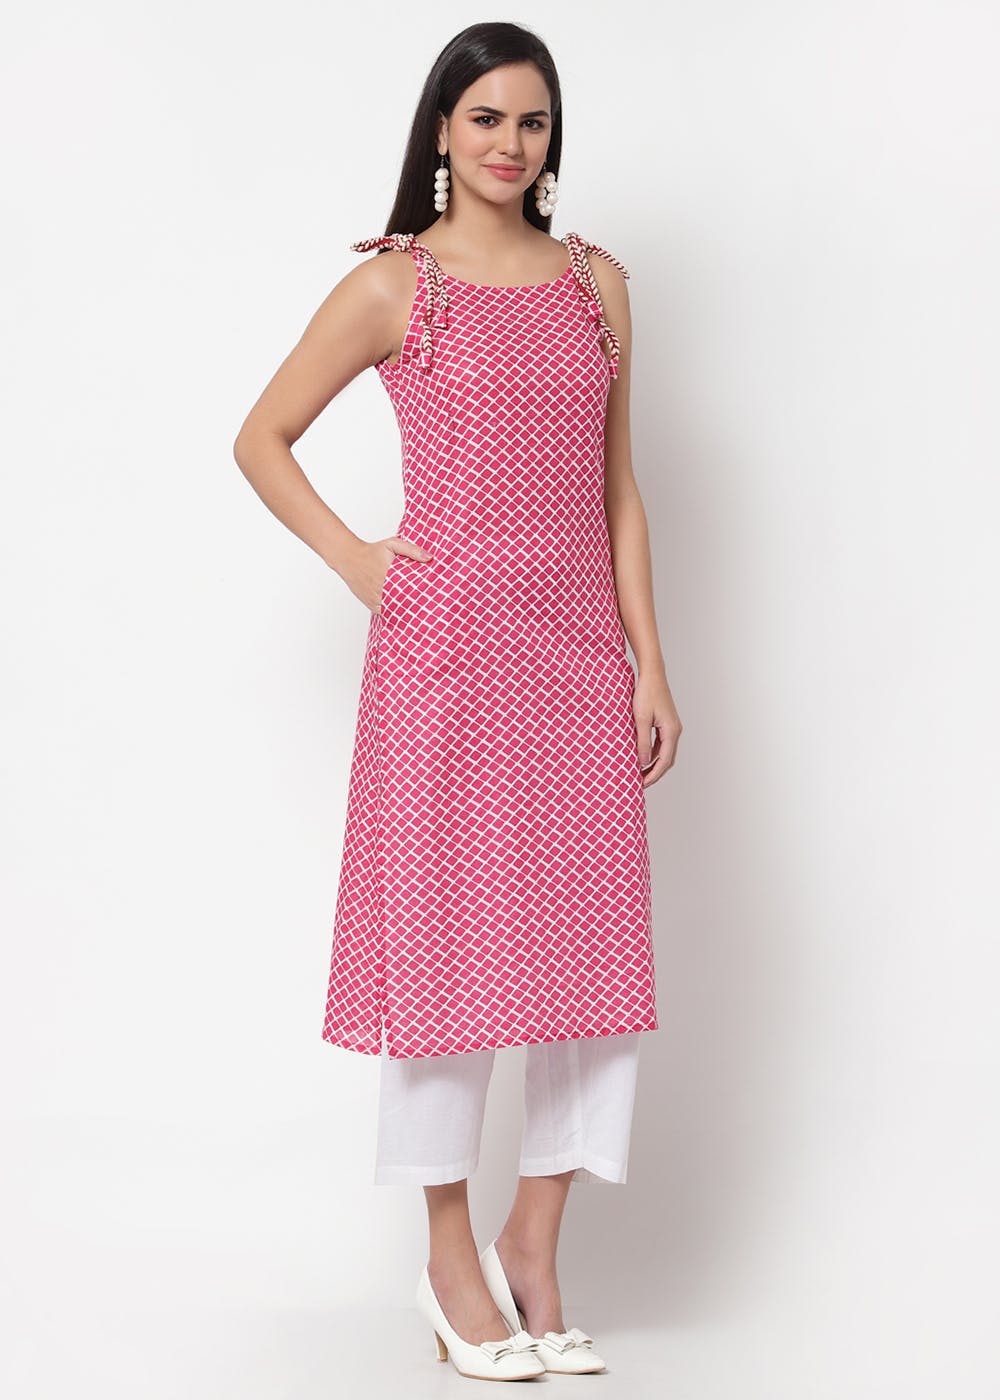 Buy Off White N Green Cotton Plus Size Kurti After Six Wear Online at Best  Price | Cbazaar